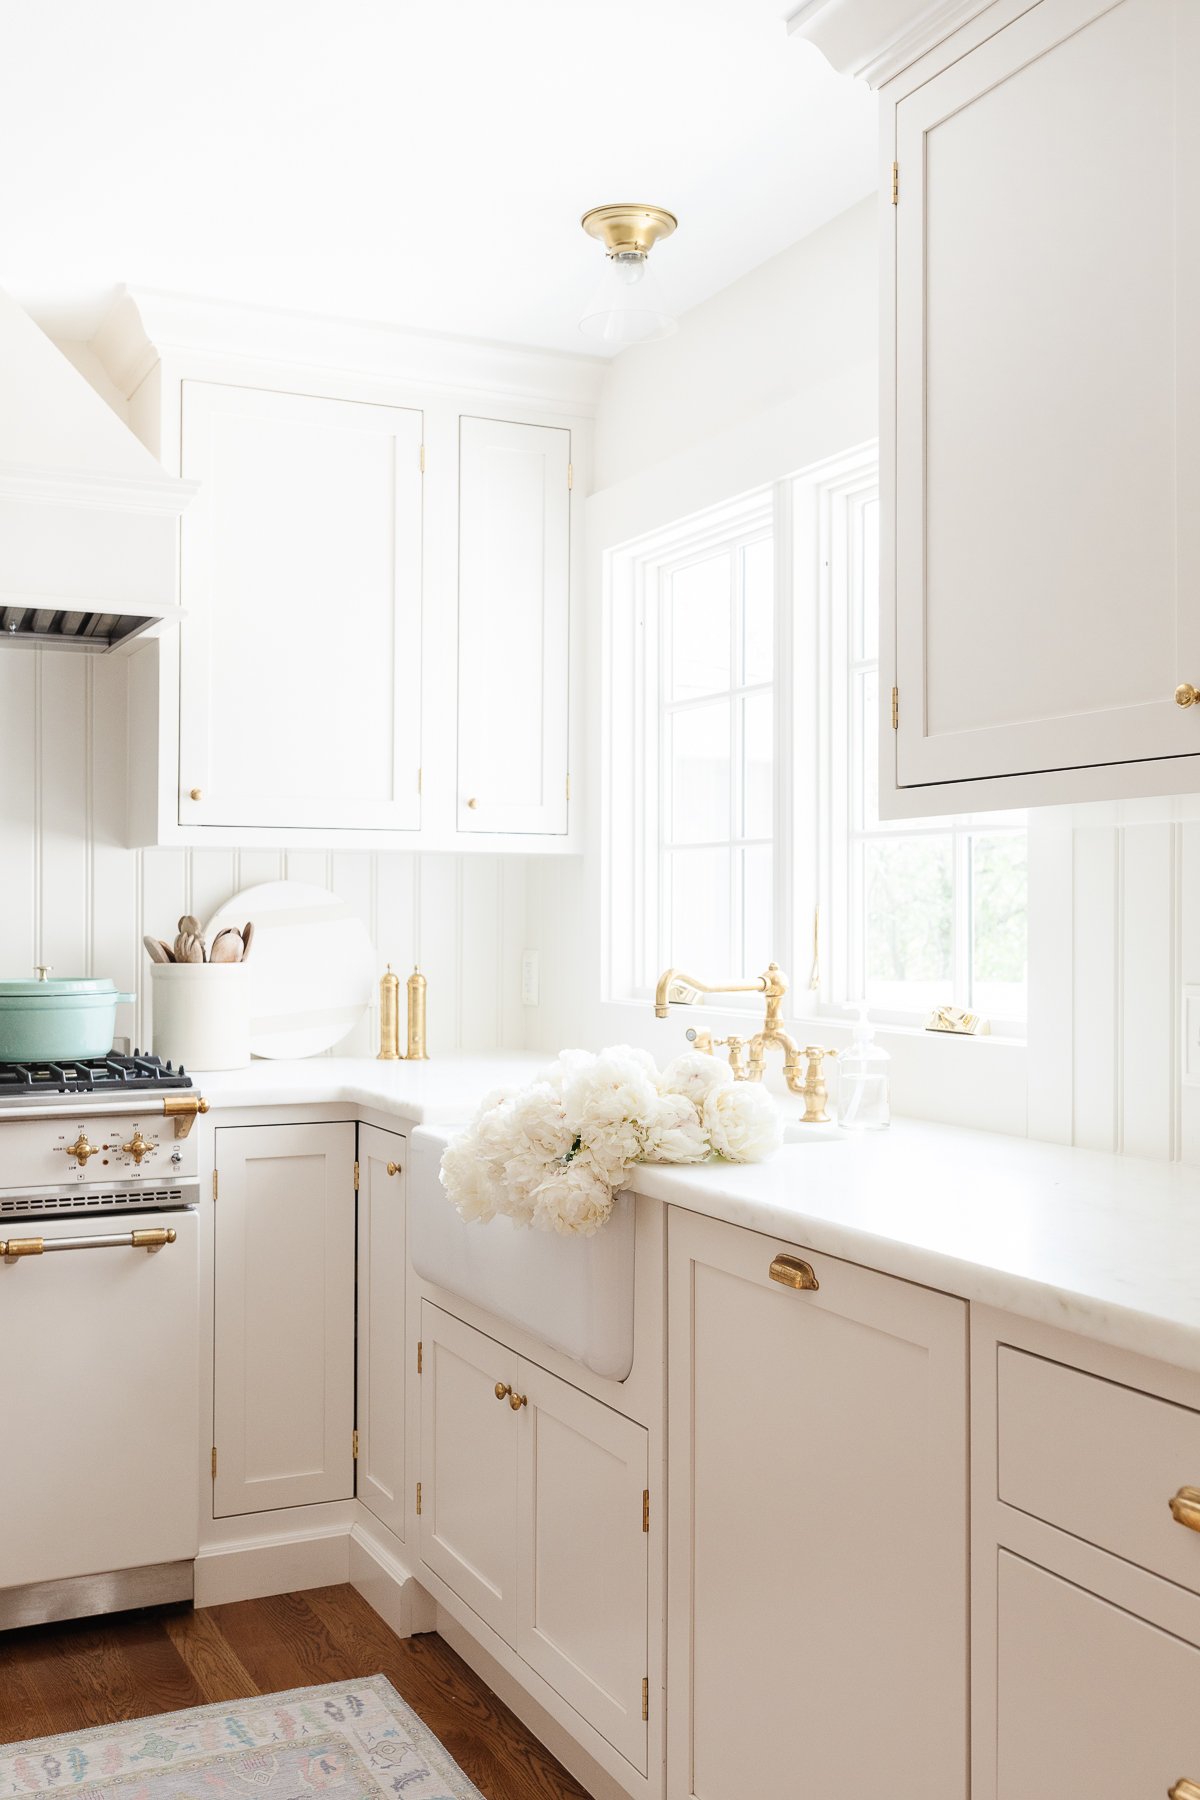 A cream kitchen with marble countertops with an eased edge.